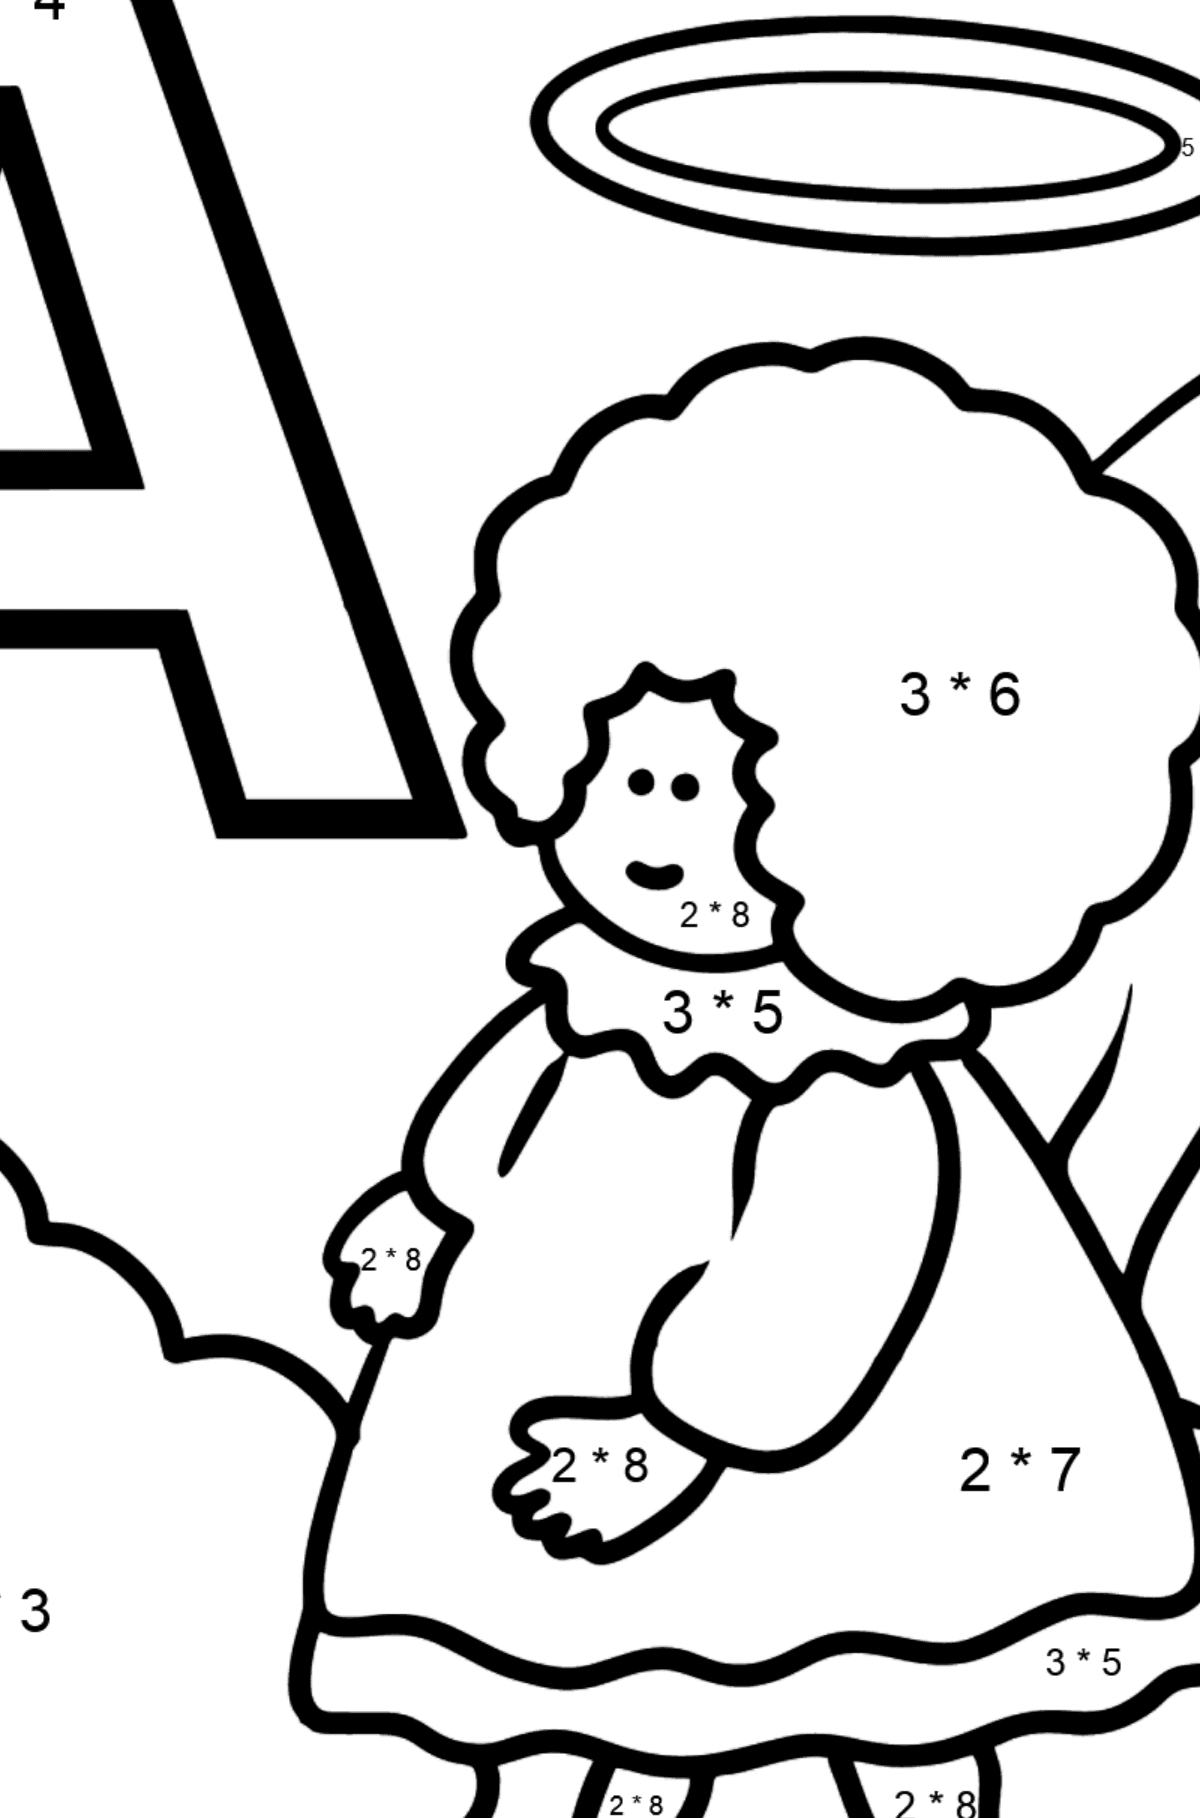 Spanish Letter A coloring pages - ÁNGEL - Math Coloring - Multiplication for Kids